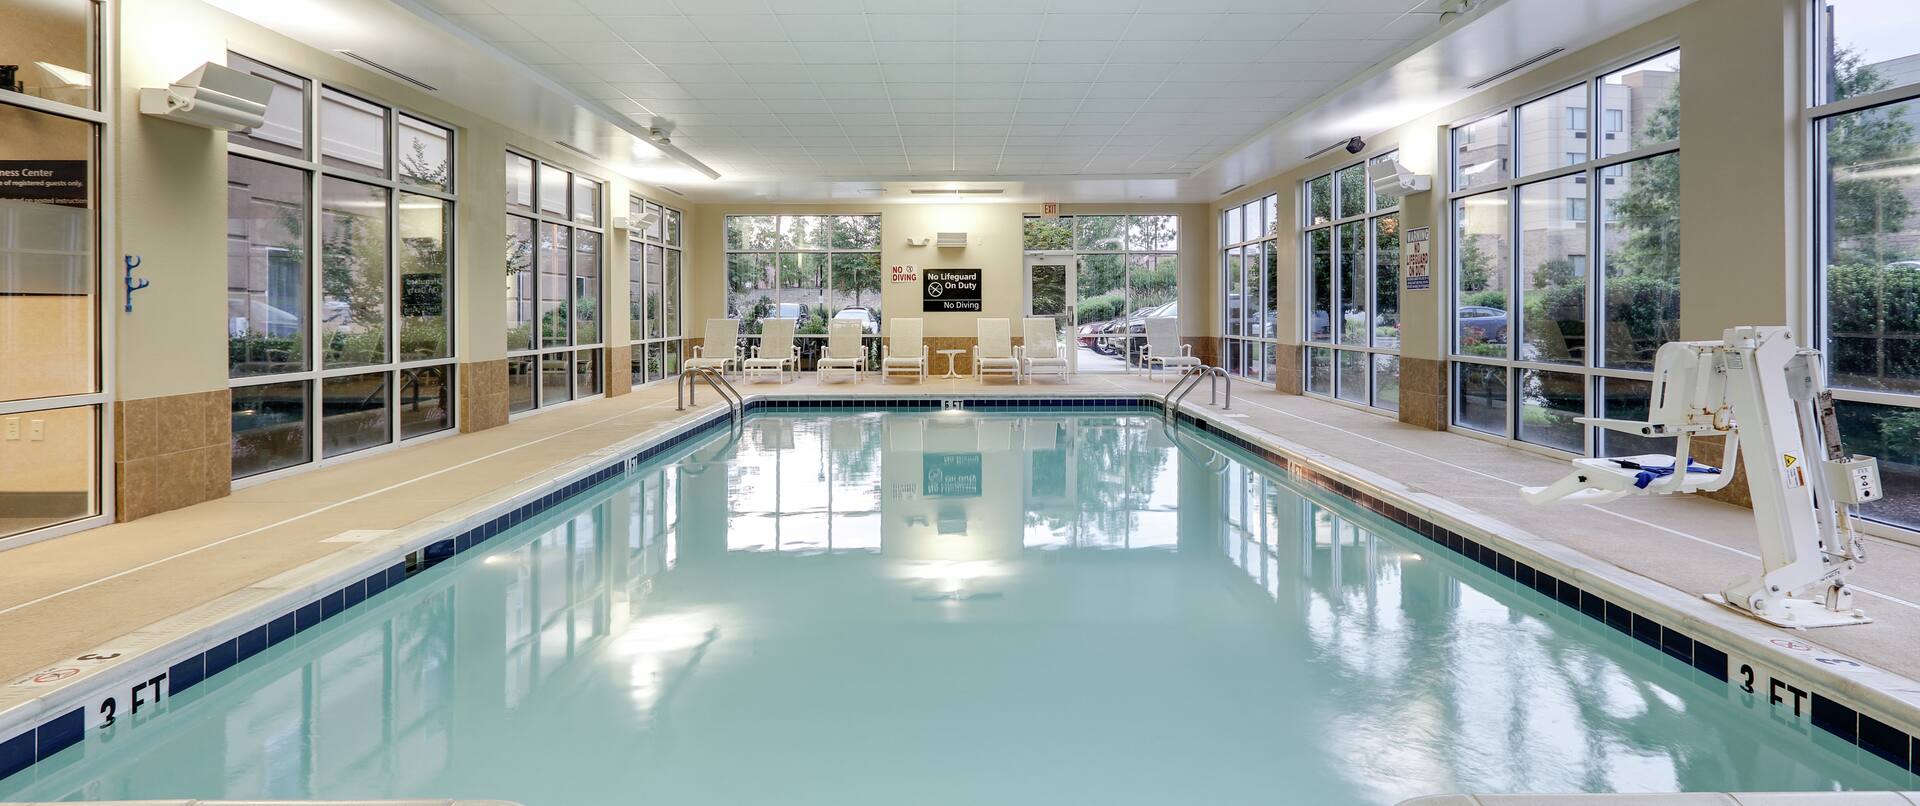 Indoor Pool With Accessible Lift